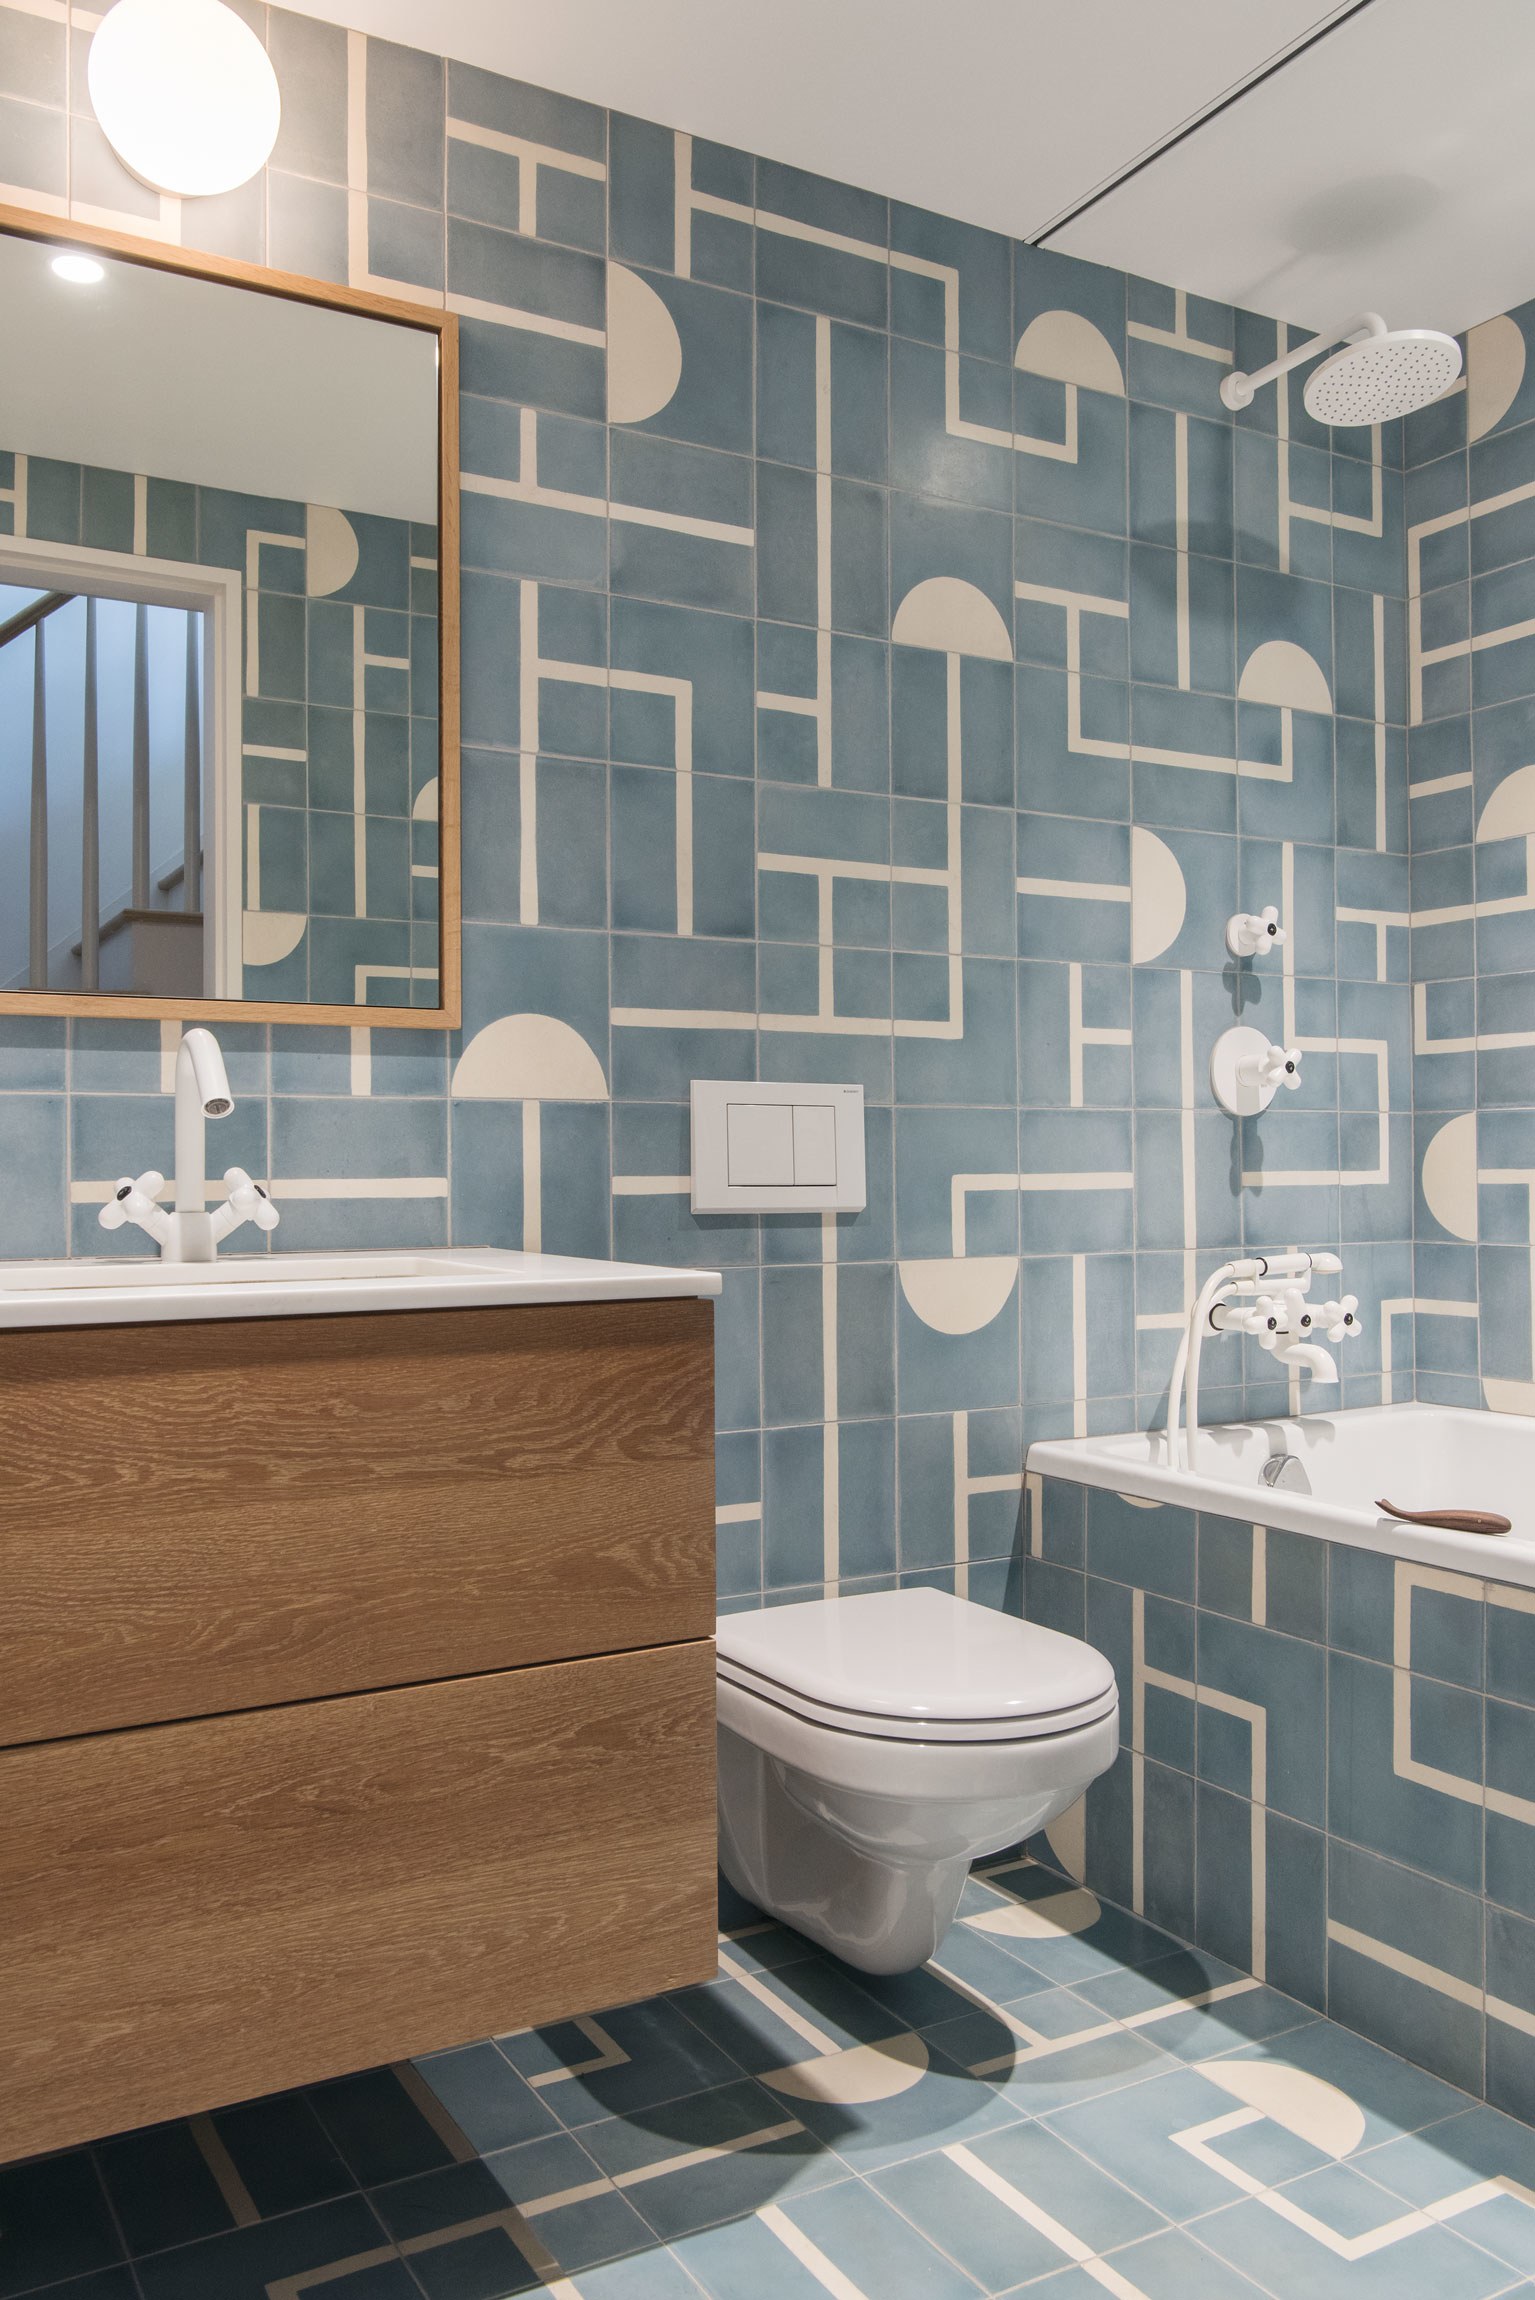  Roberts had fun with the kids' bathroom, covering it floor-to-ceiling in graphic  Popham Design  Brasilia tiles. "It has no windows, so the client wanted something that was fun and bright," she says. All of the fixtures play off of the pattern: the 